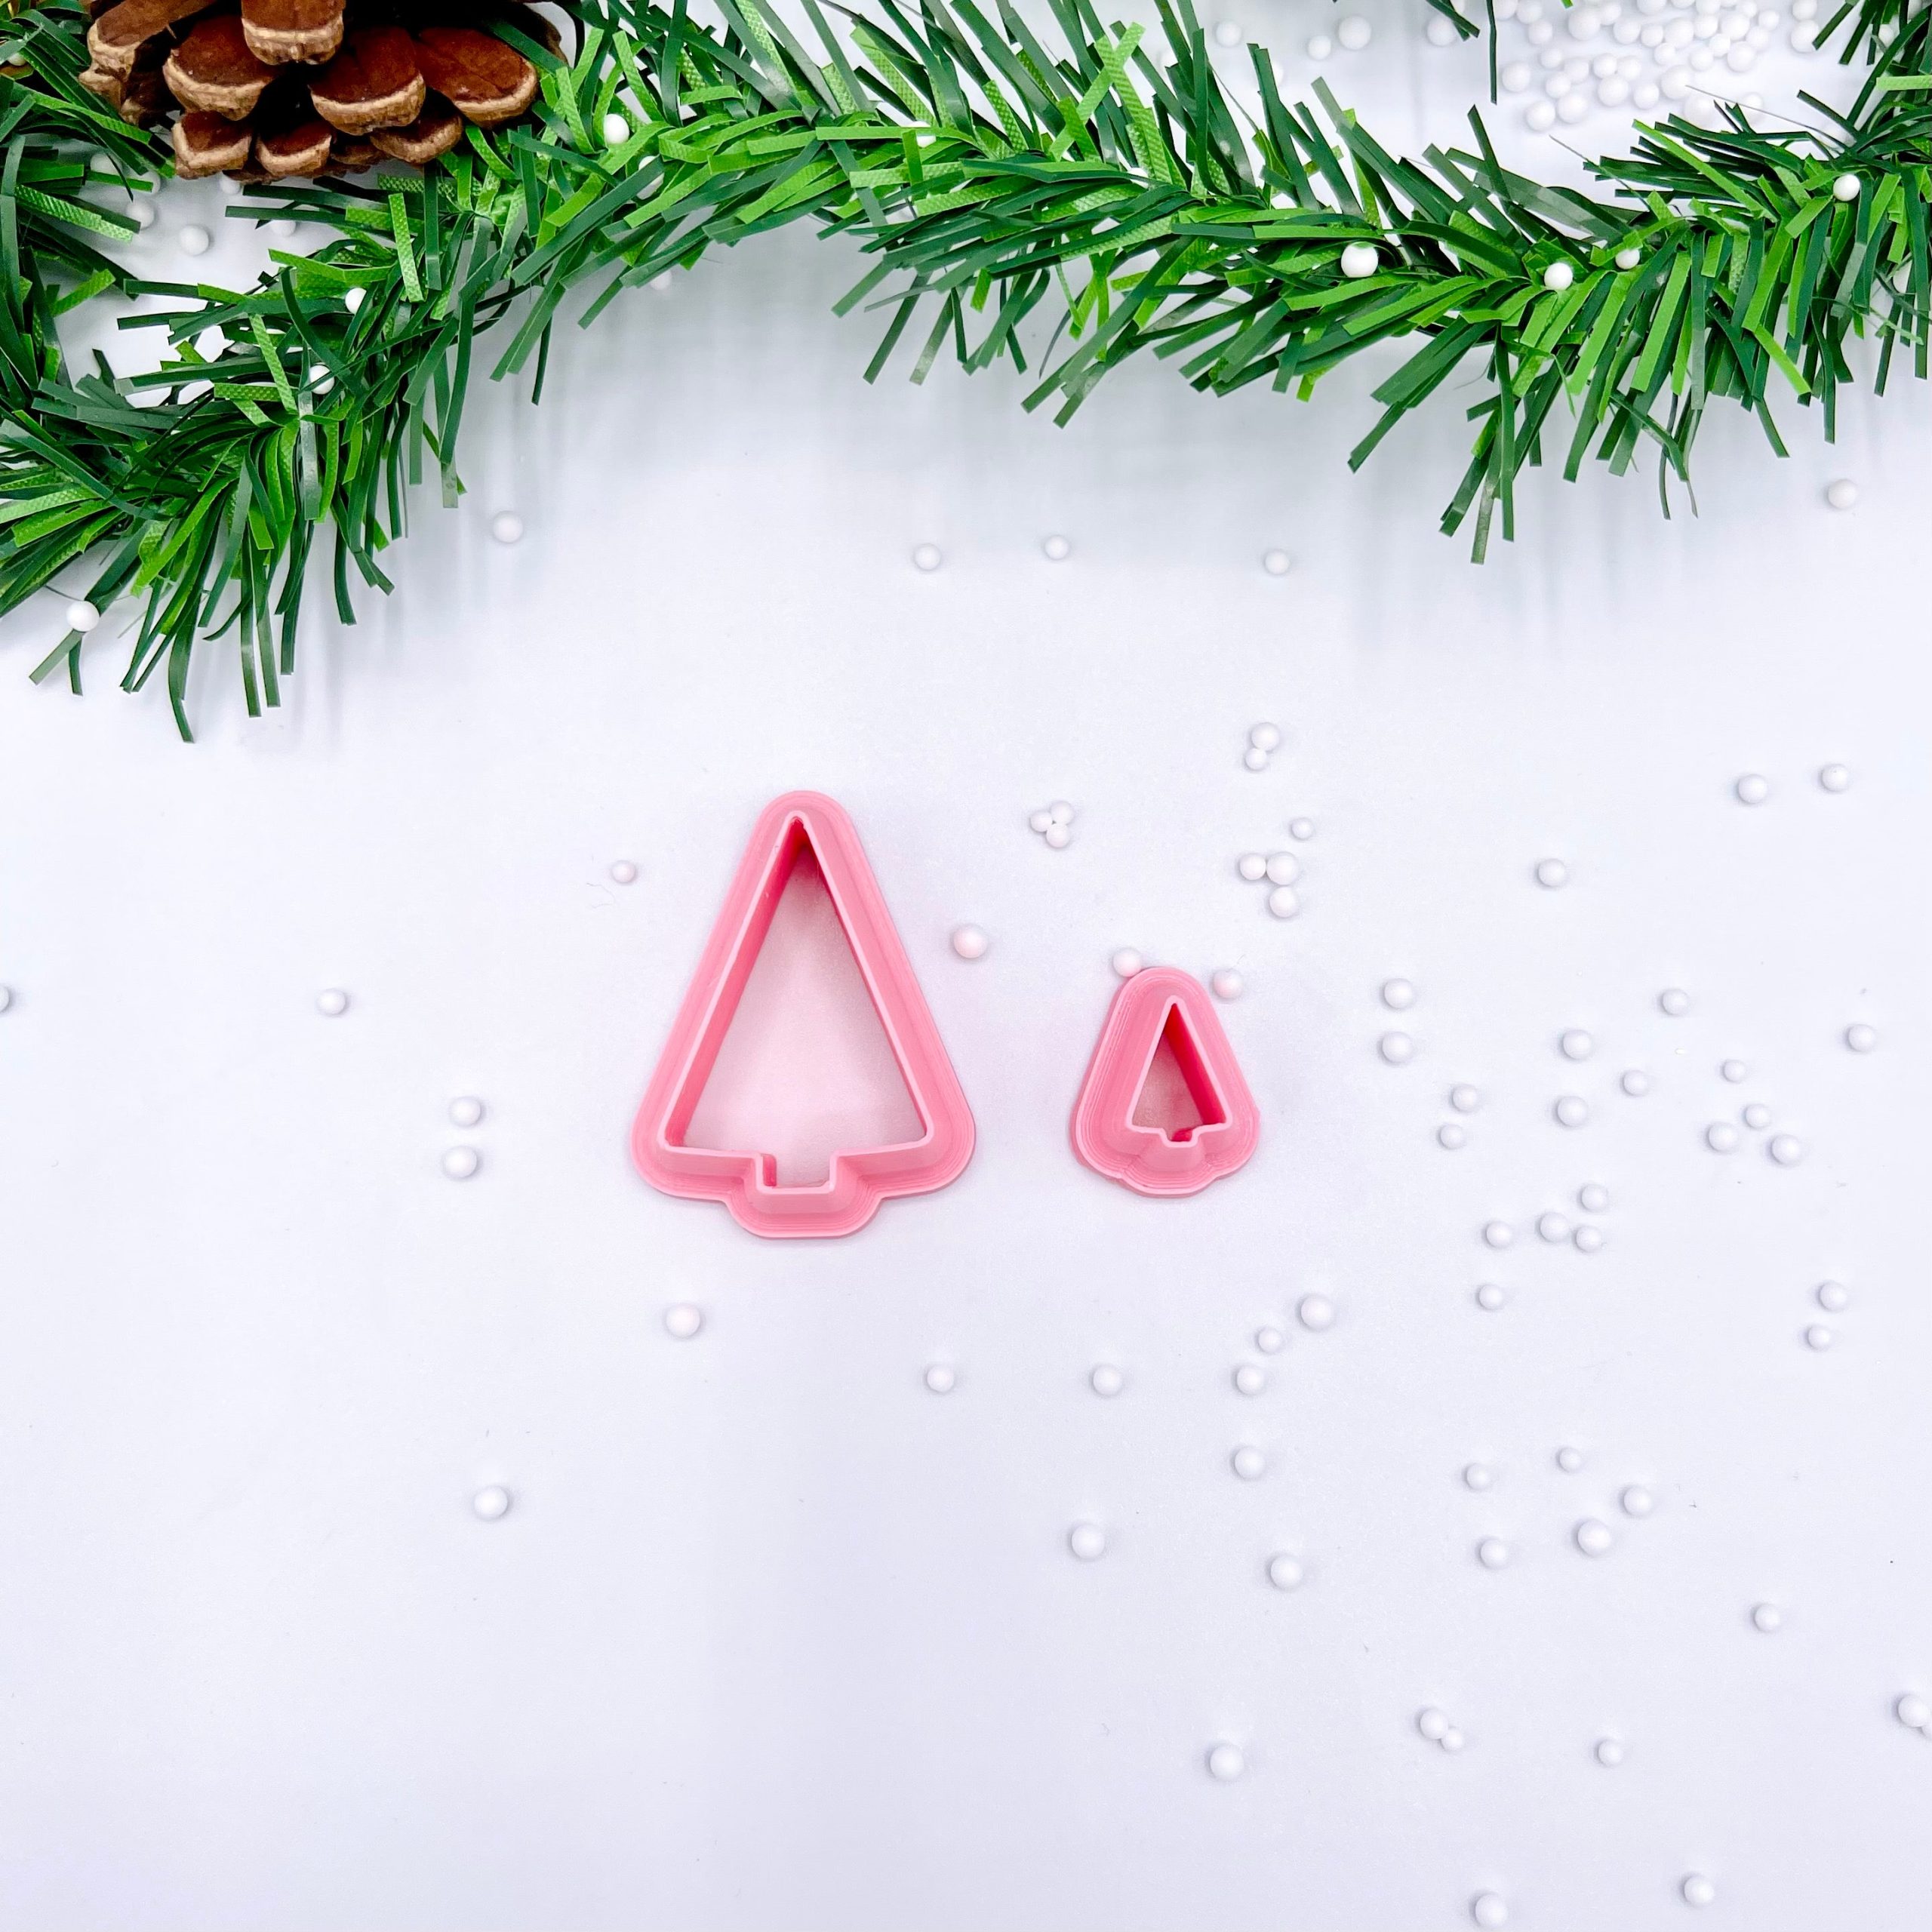 Minimalist Christmas Tree Clay Cutter Cookie Cutter